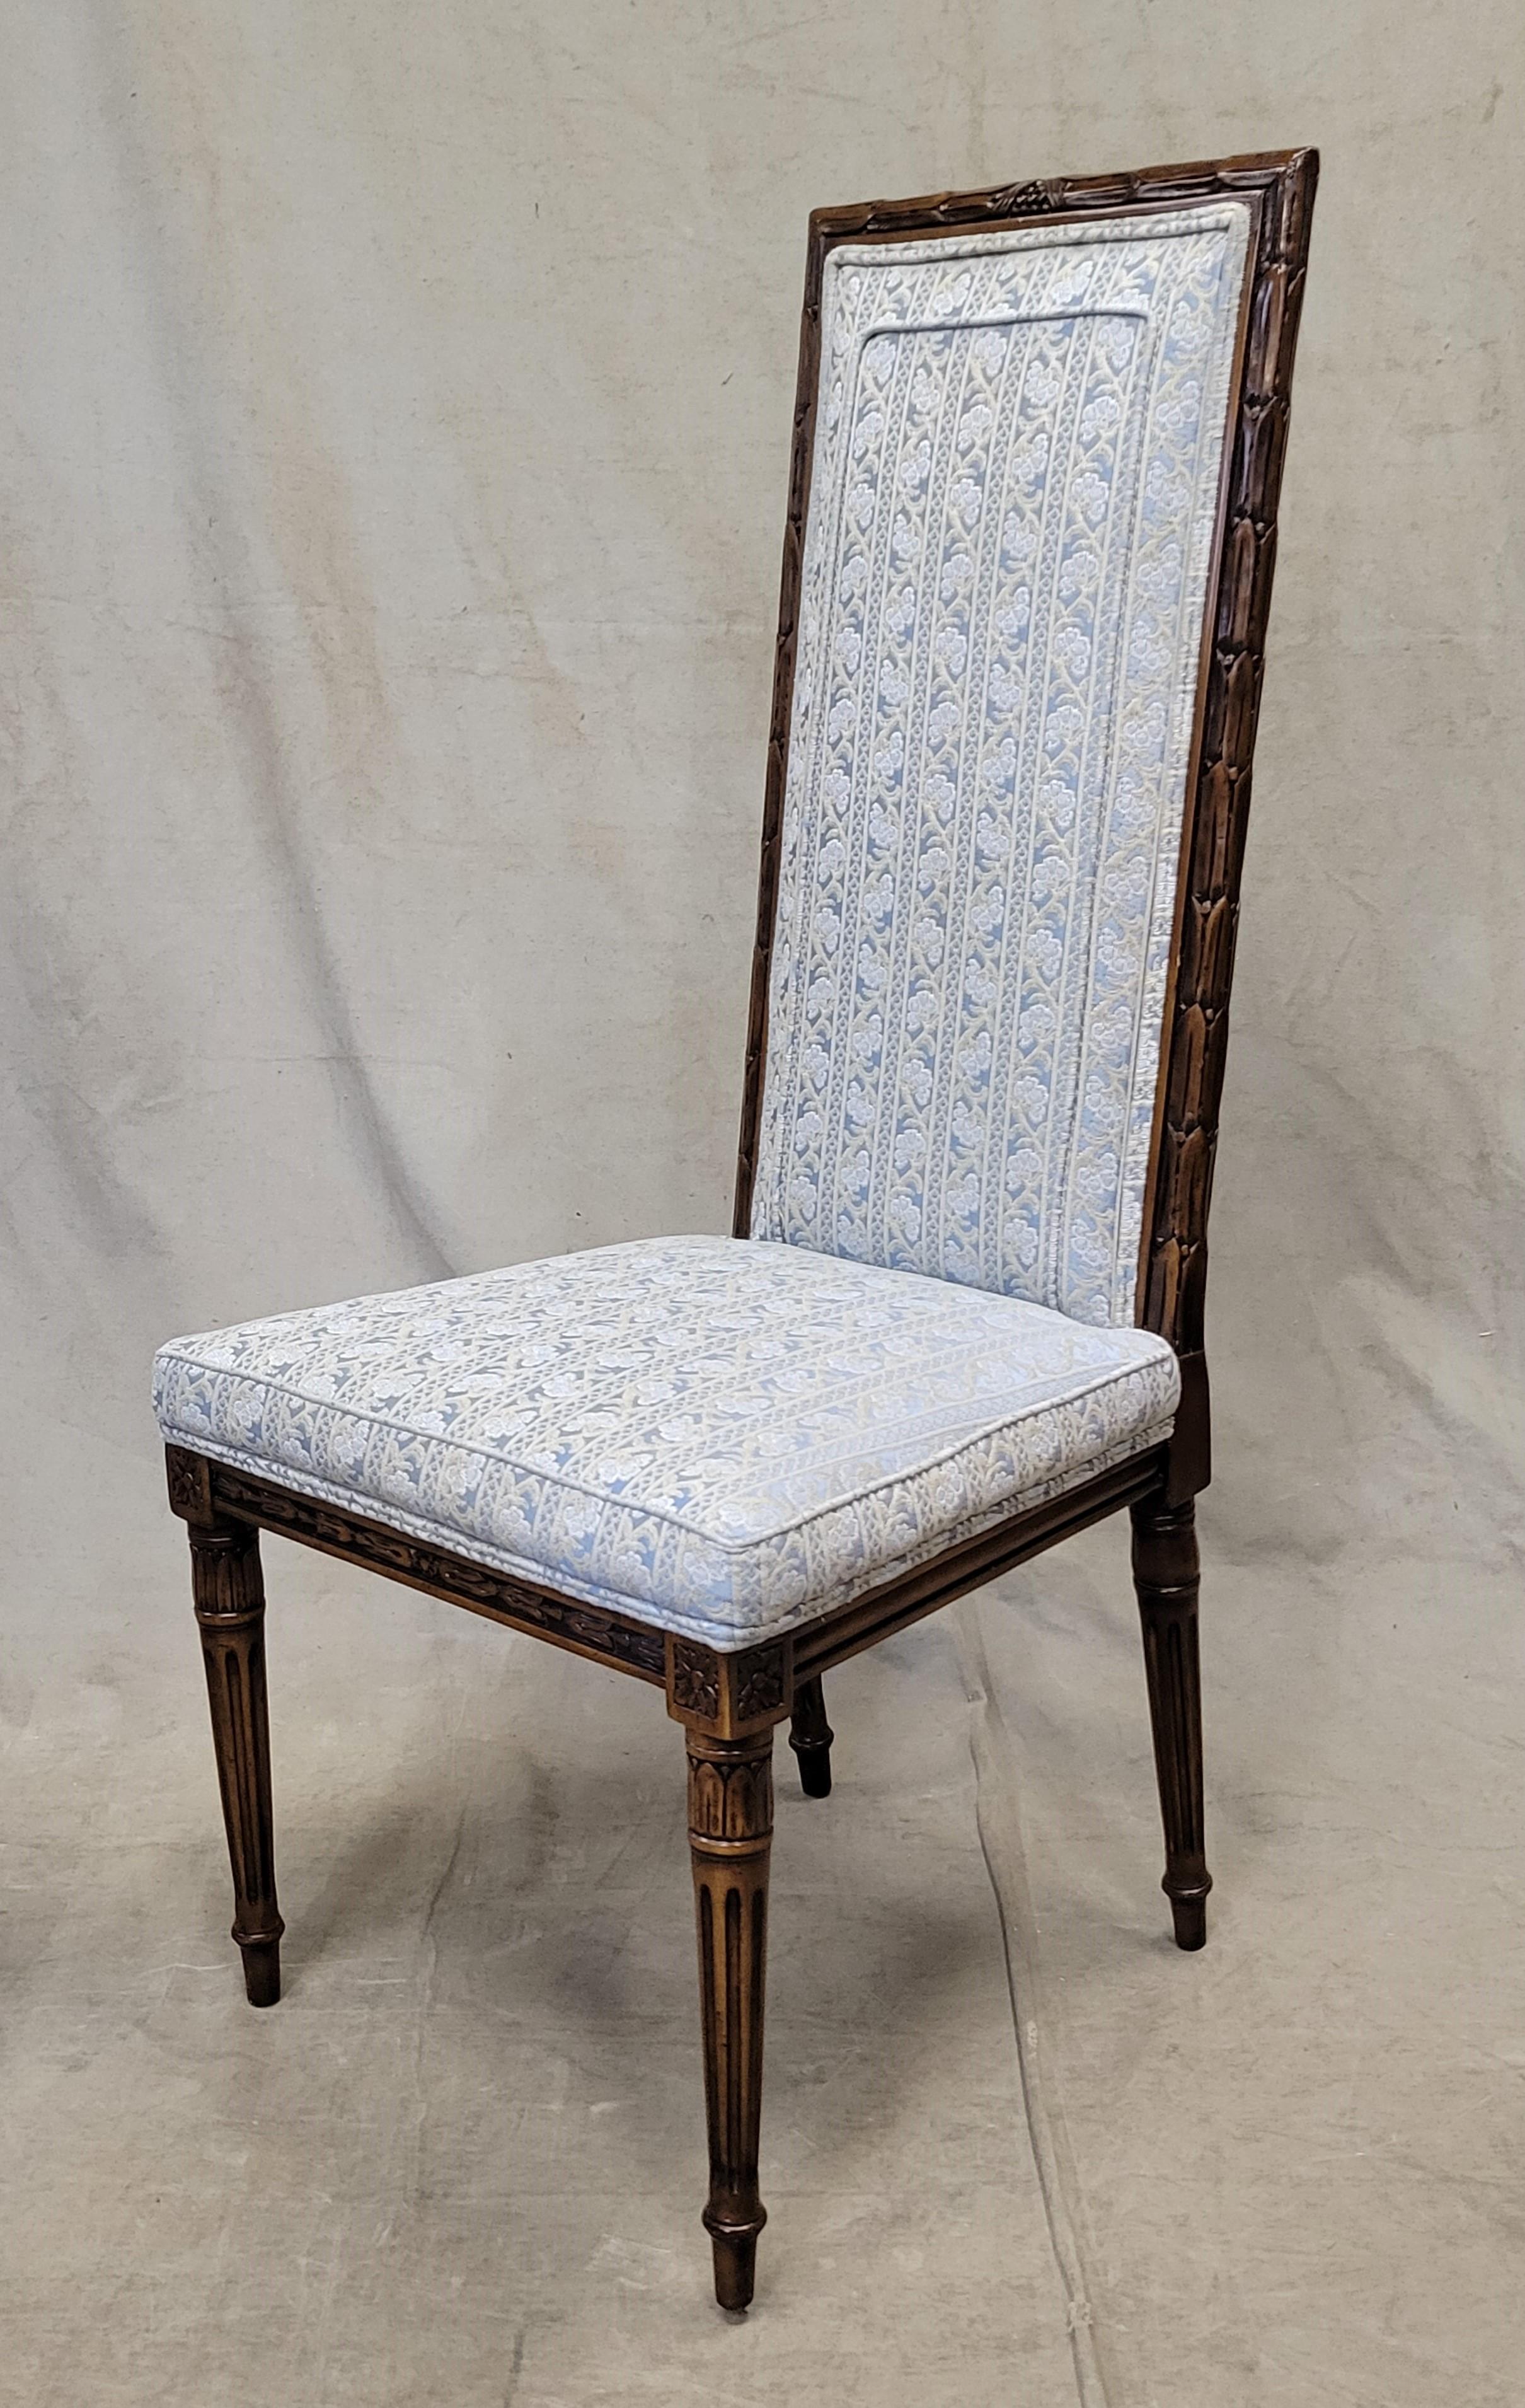 American Vintage Karges Neoclassical Dining Chairs With Pale Blue Upholstery - Set of 8